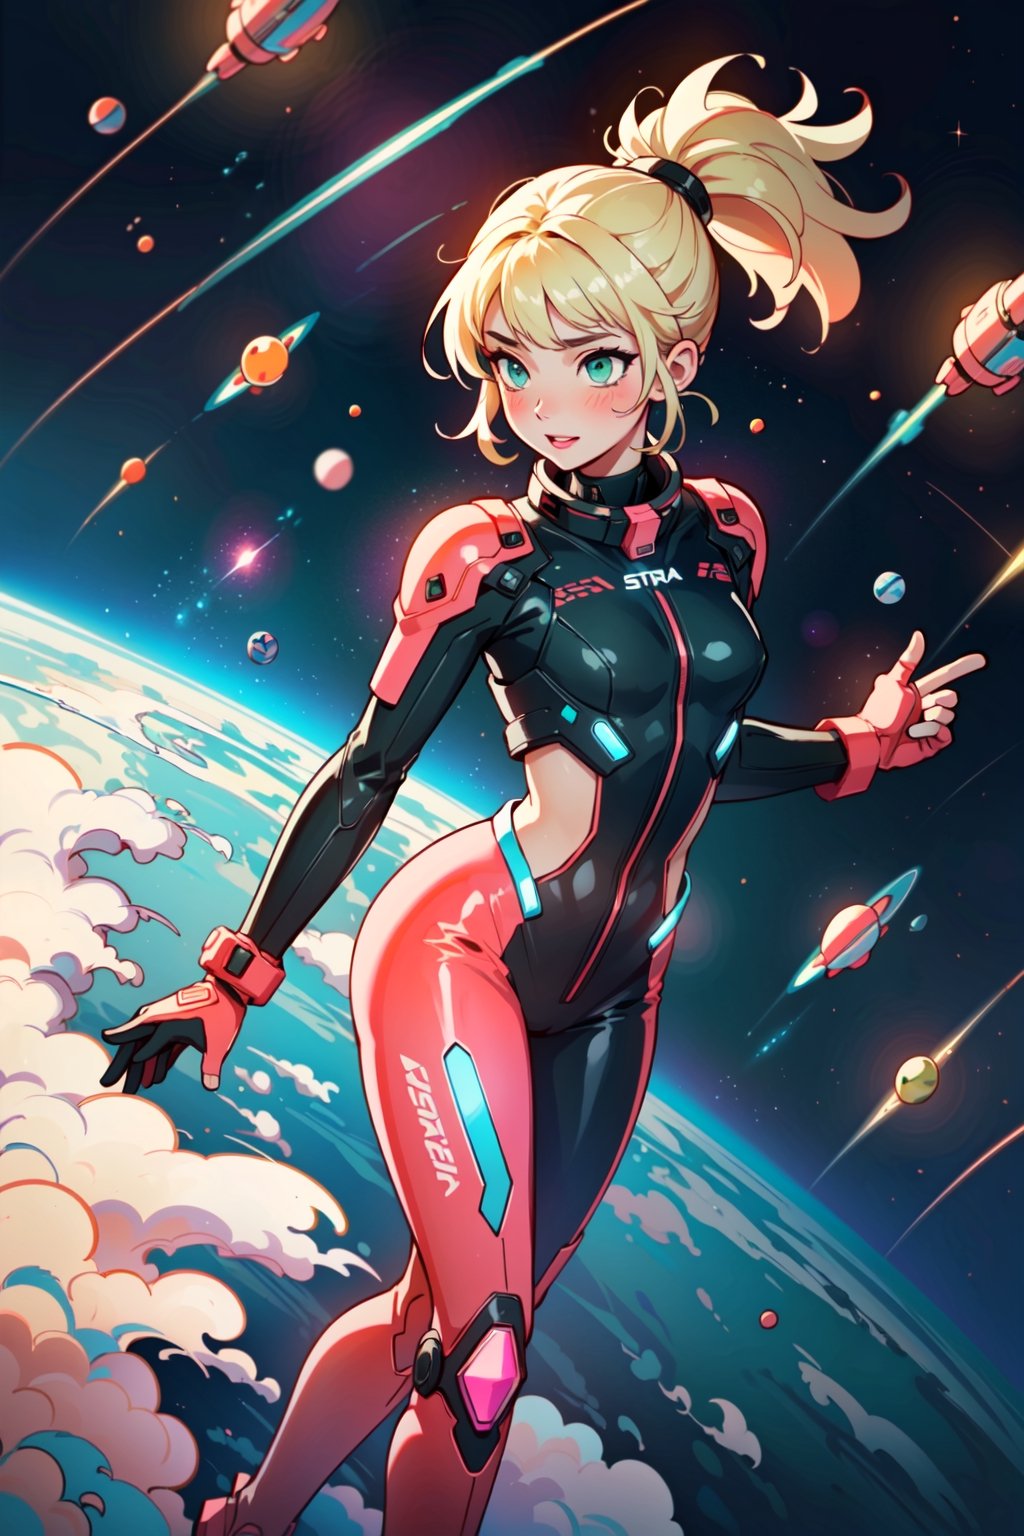 (((erotic), elegant, neon), bodysuit, futuristic), orbital, athletic, full body,

blush, happy, (green_eyes), blonde_ponytail, lipstick, gloves, chocker,

(outer_space), stars, light_particles,

white, orange, pink, violet, red, purple, lime, porcelain, azure, (enhanced colors, colorful), bokeh, 35mm-lens, glowing light, neon illumination,

(((masterpiece, best quality, perfect visual, ultra detailed), 8K, HDR, sharp image, professional artwork)),